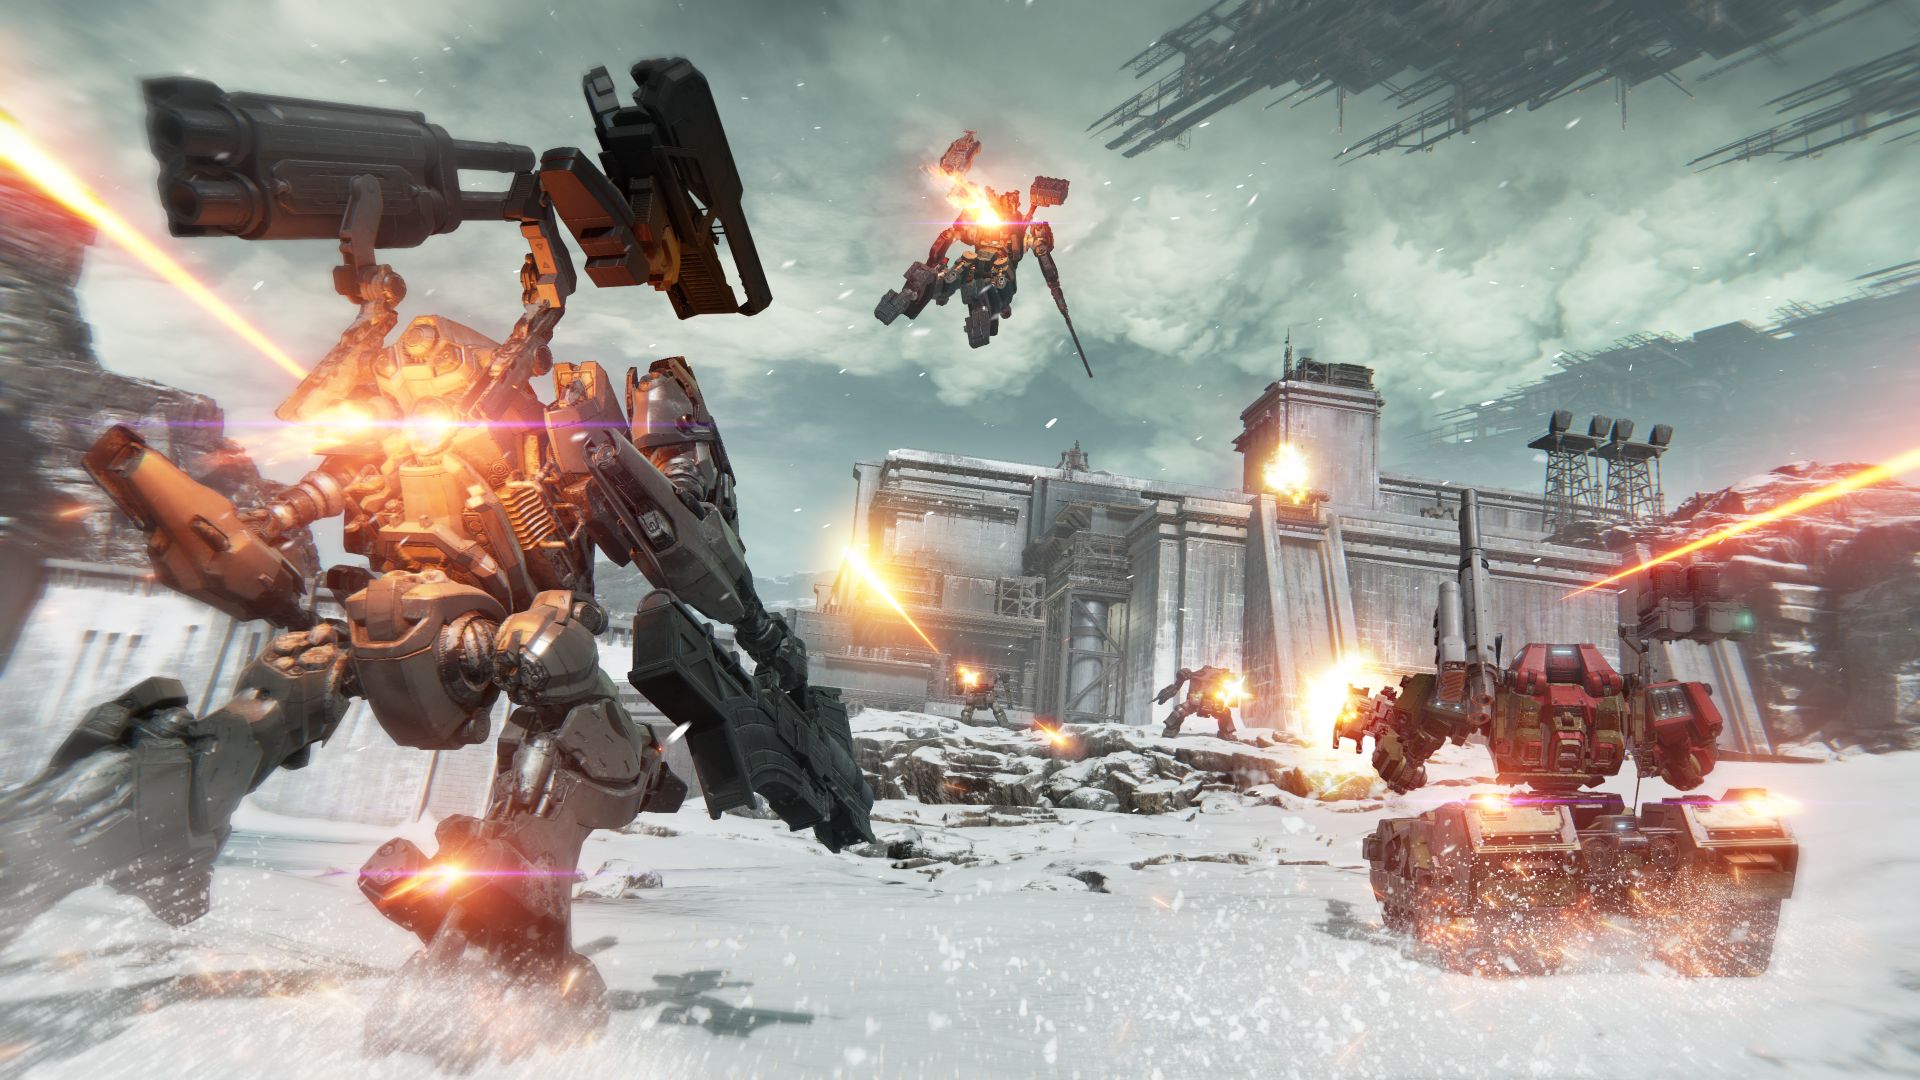 The best Armored Core 6 Fires of Rubicon deals